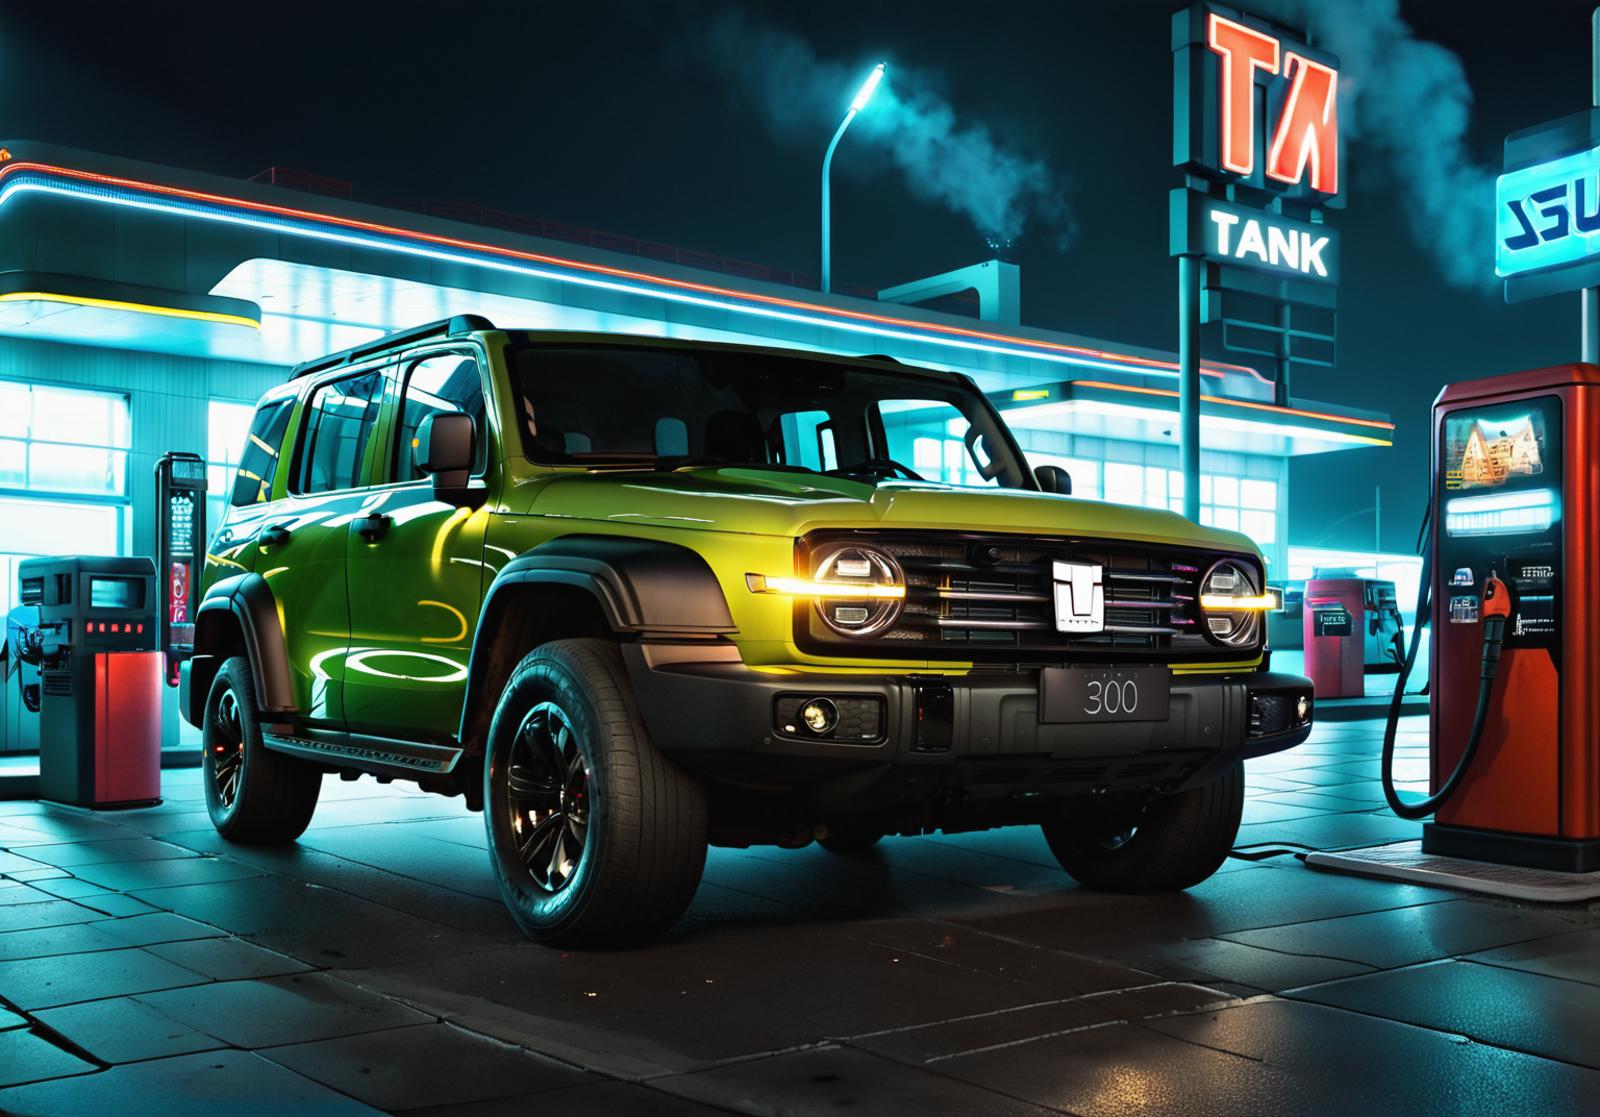 A green truck parked in front of a gas station at night.